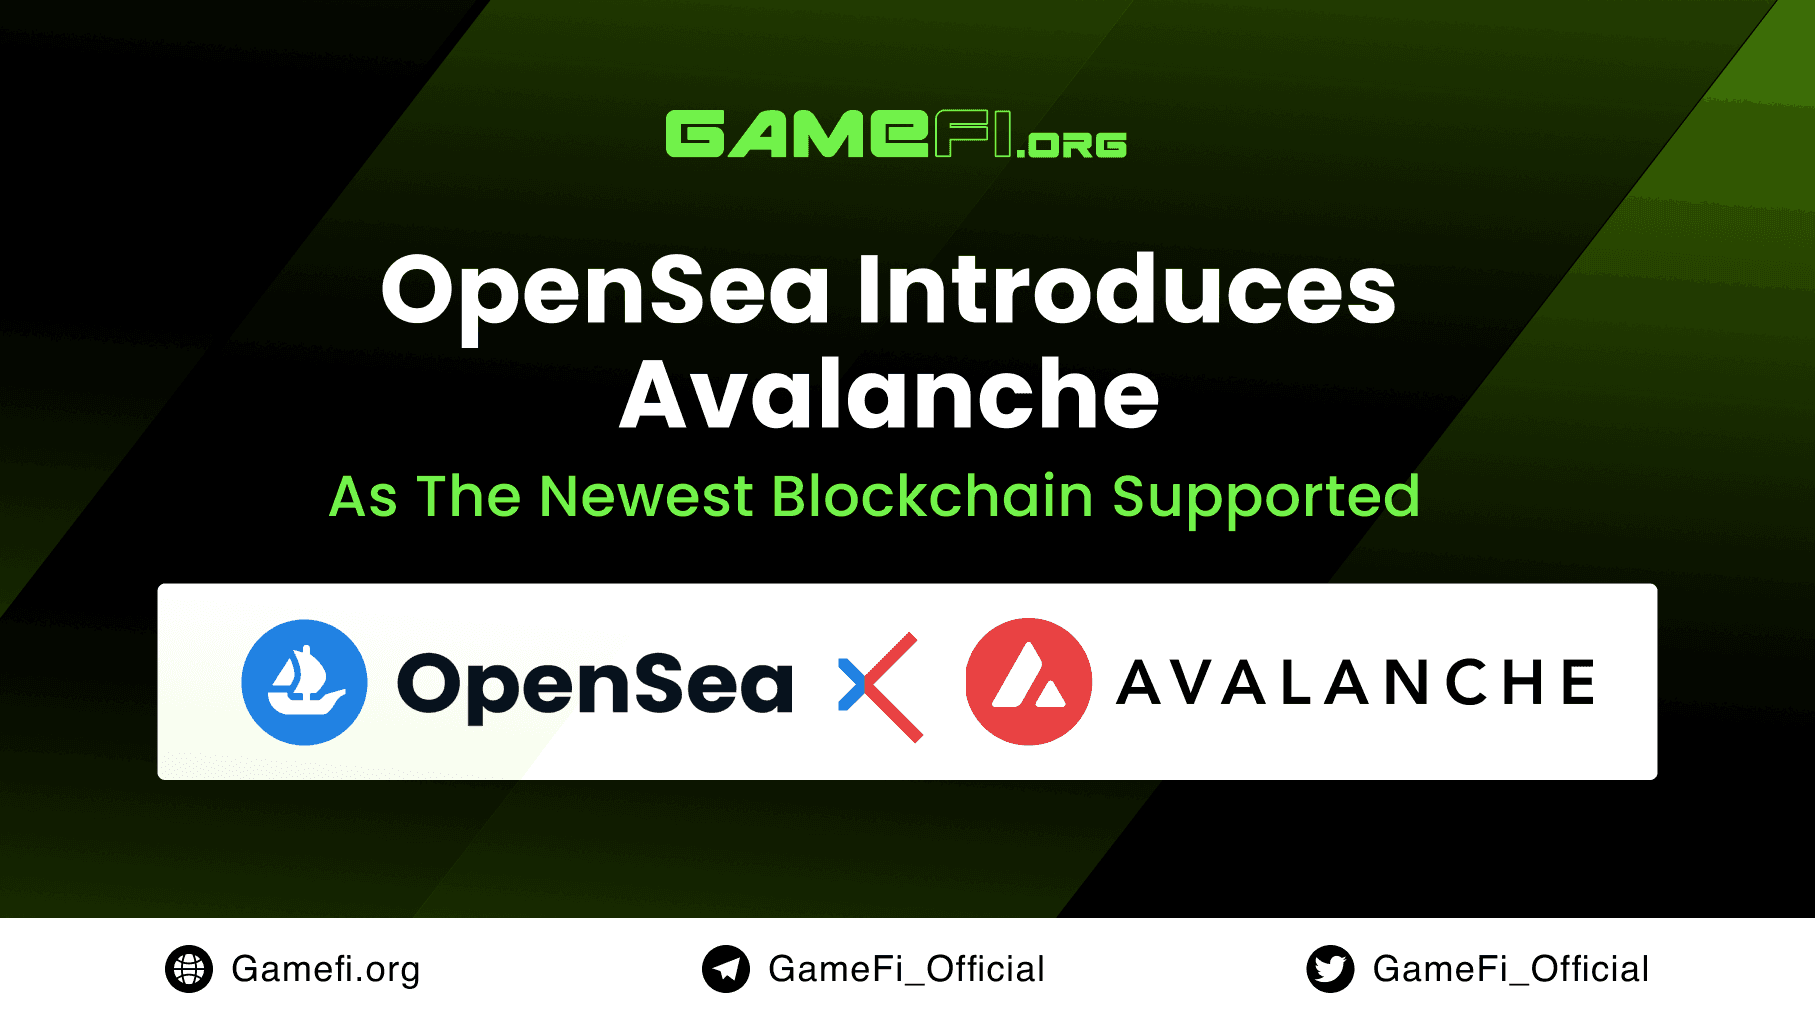 OpenSea Introduces Avalanche as the Newest Blockchain Supported